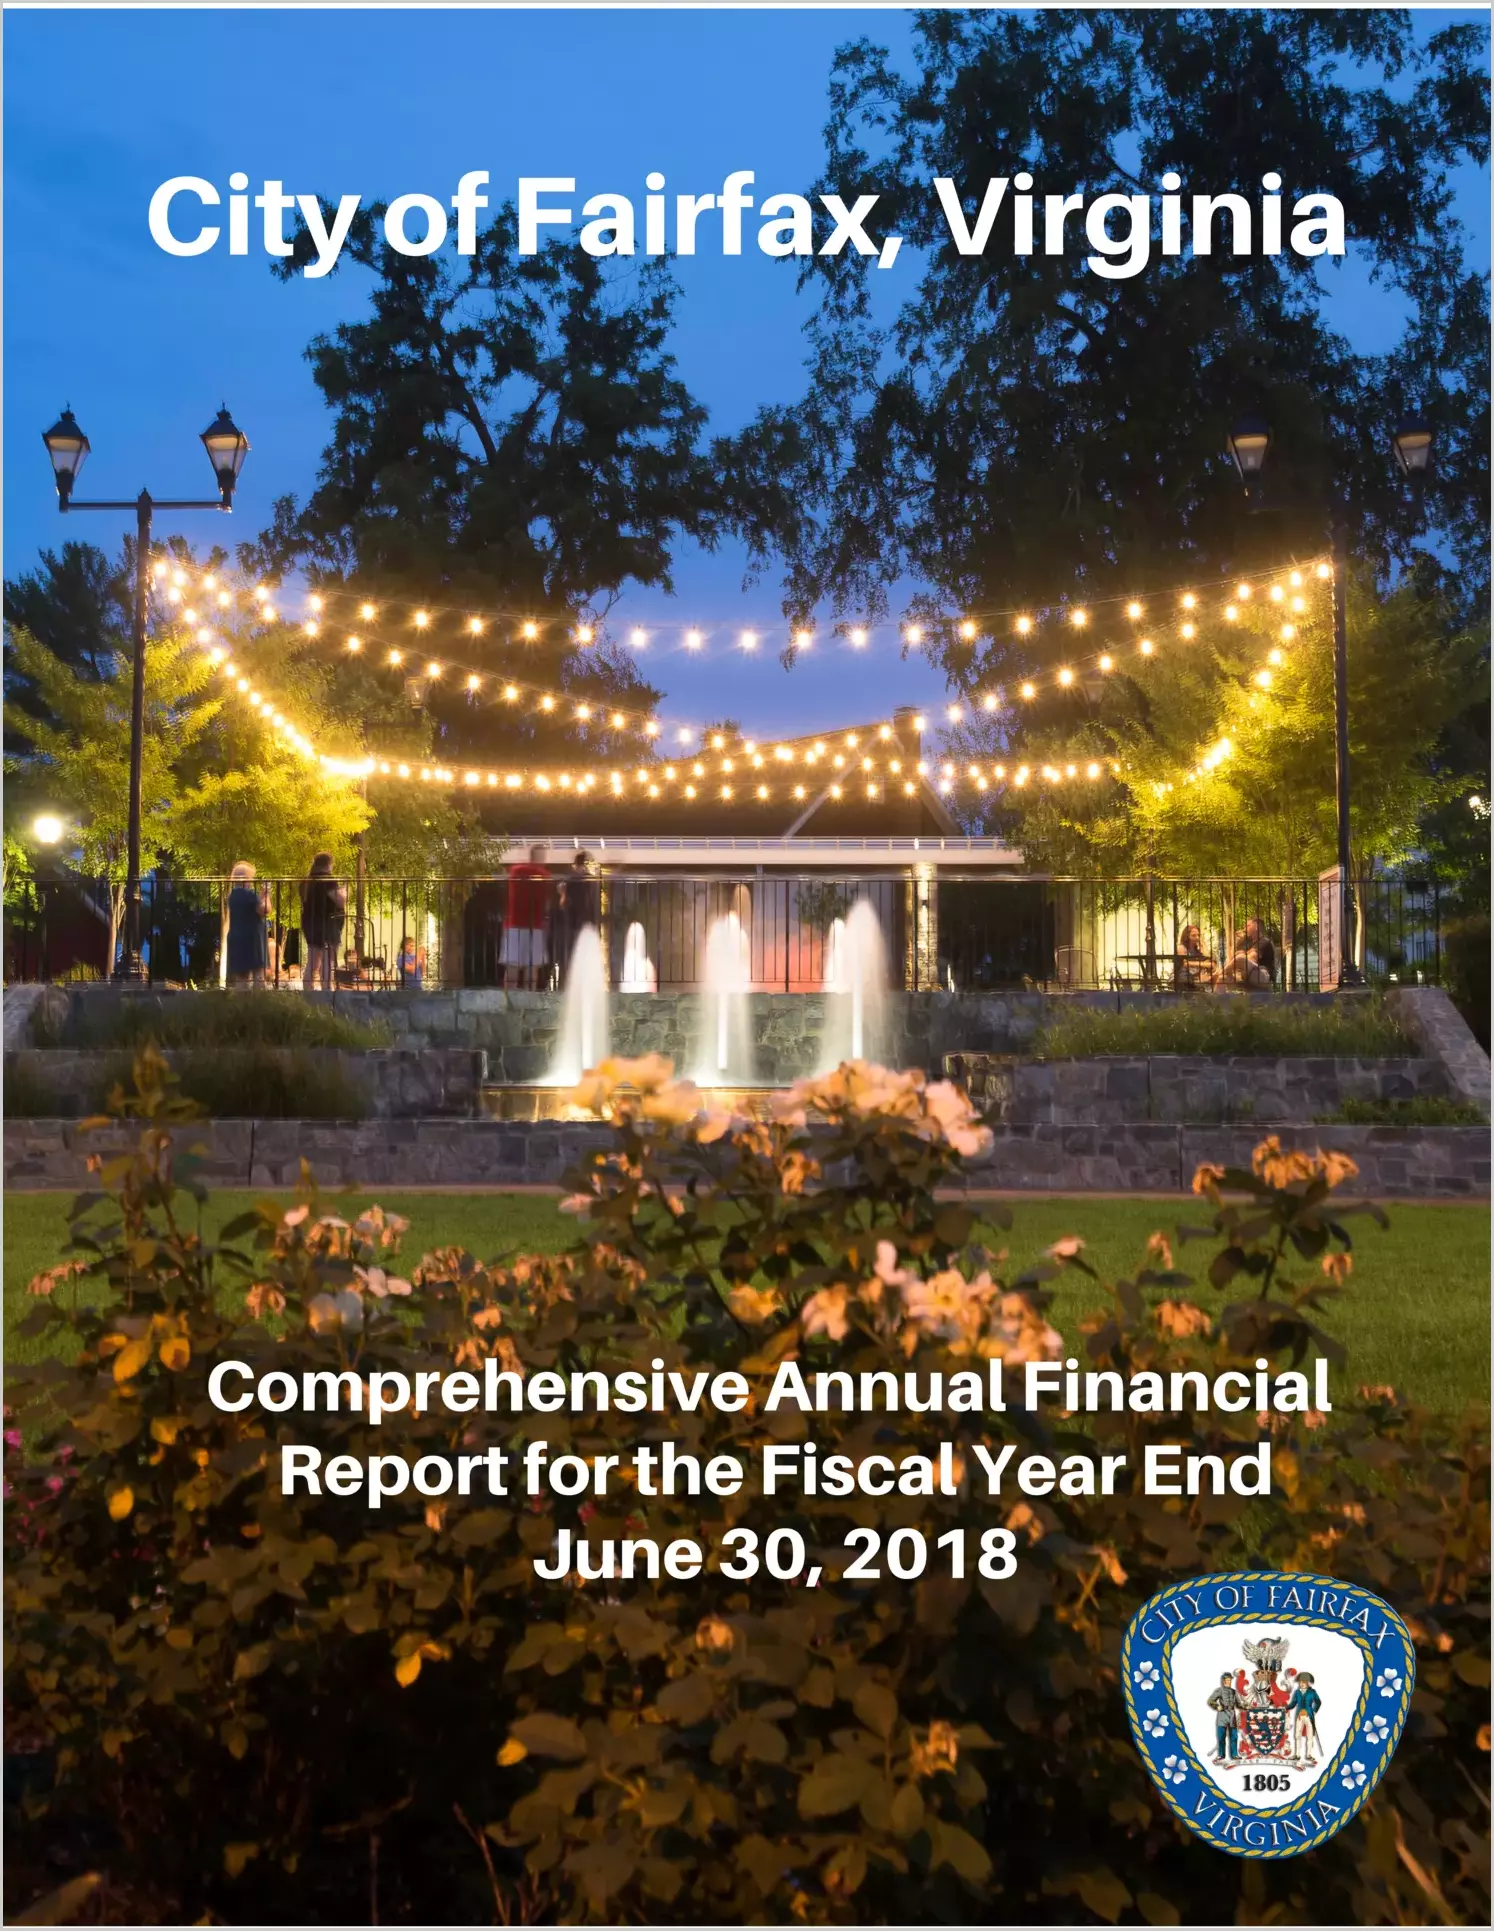 2018 Annual Financial Report for City of Fairfax